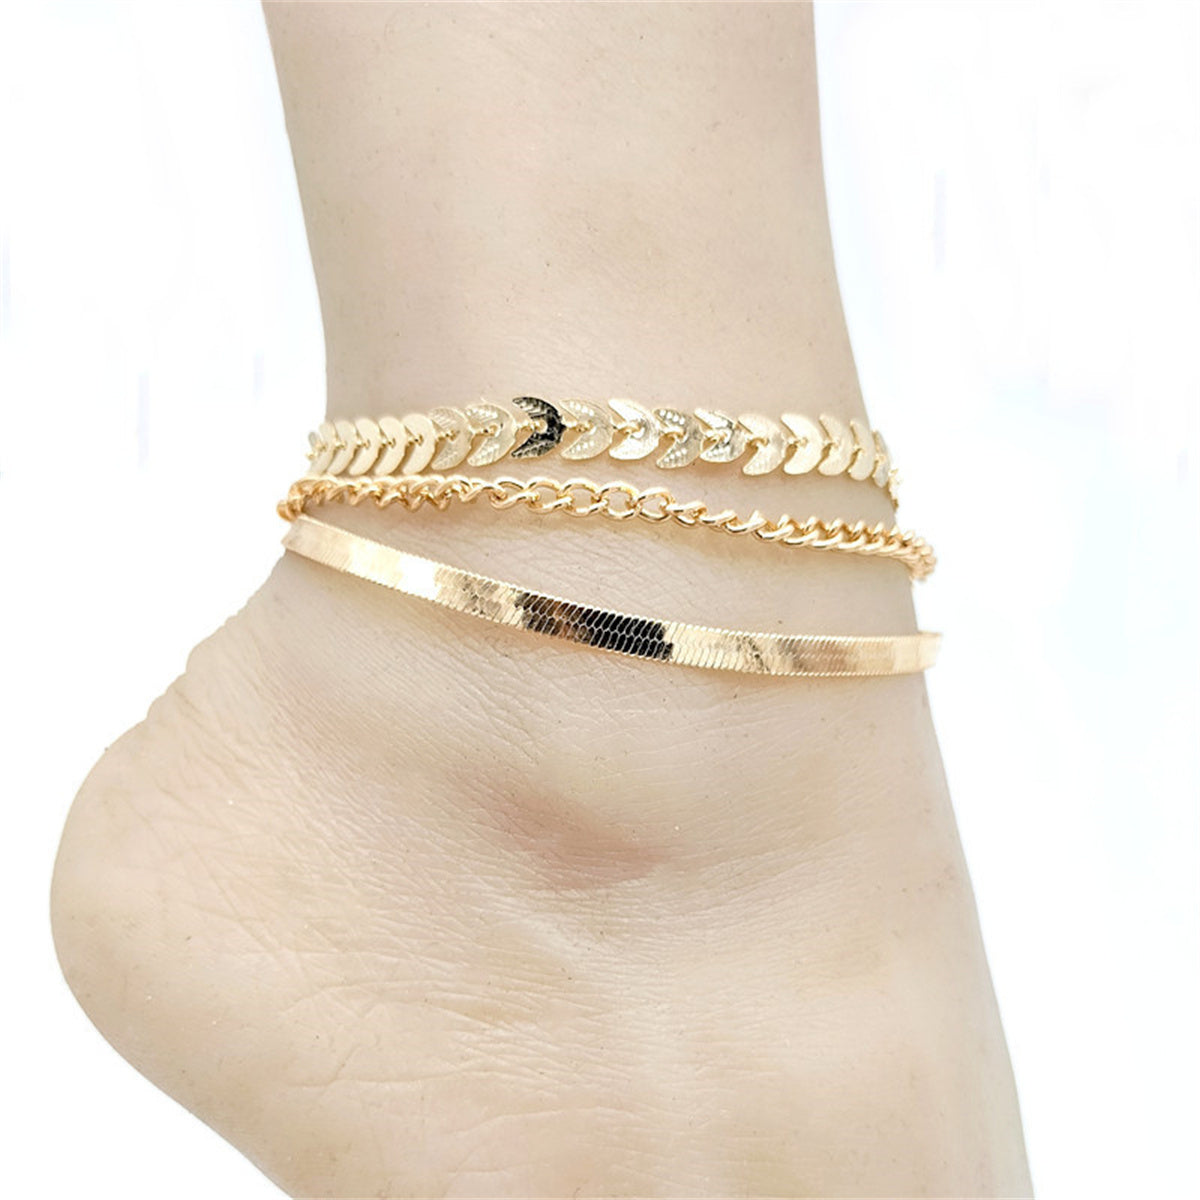 Gold Plated Anklet Fashion Anklet Wheat Ear Chain Snake Bone Anklet